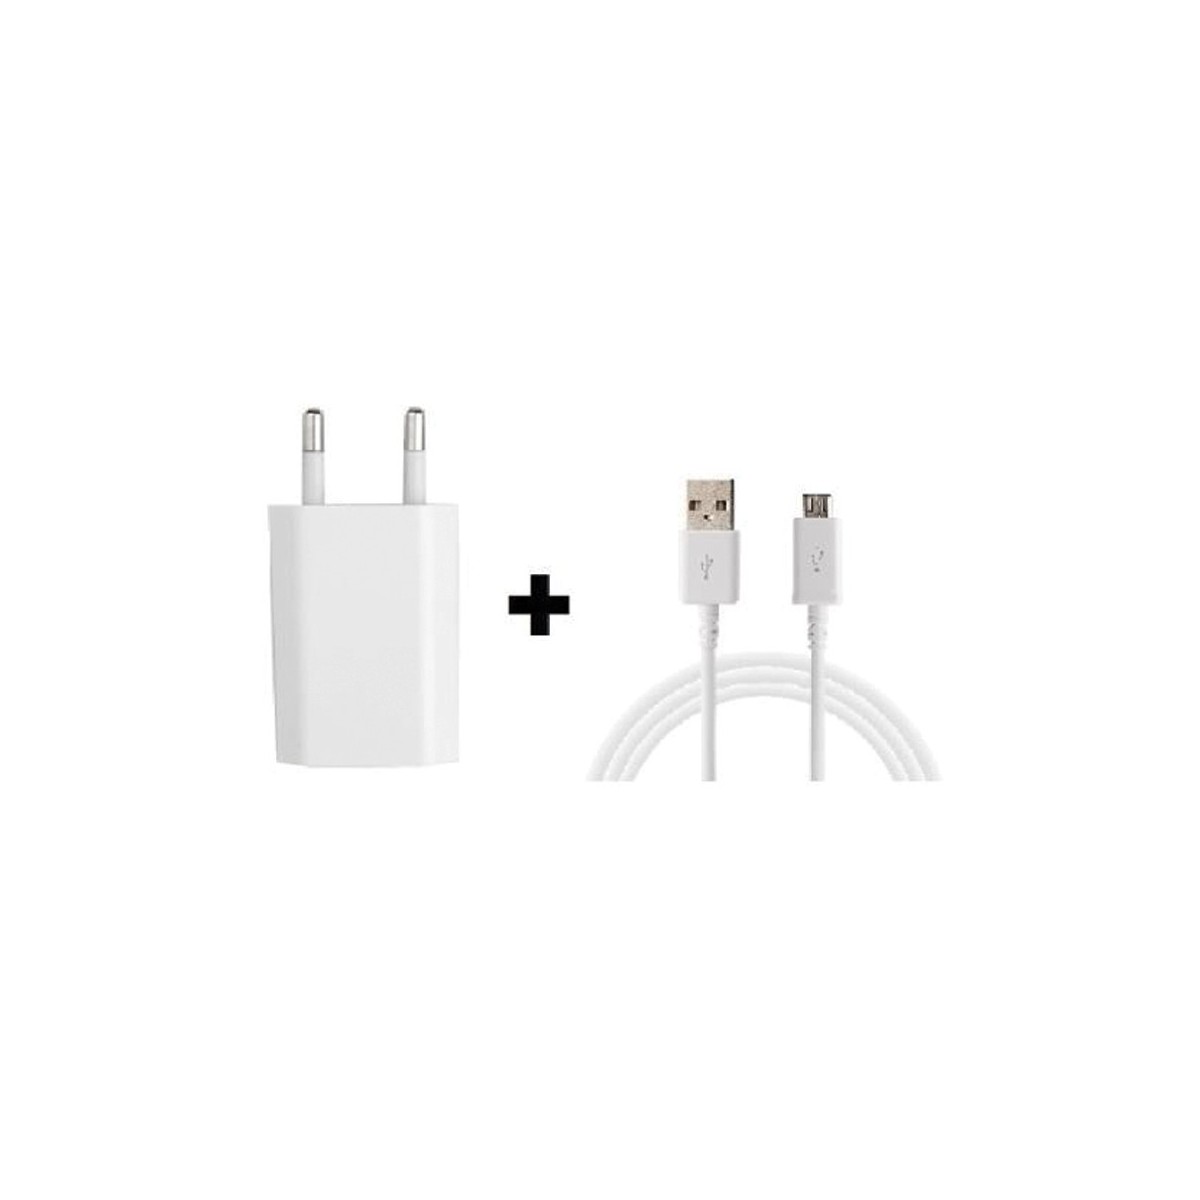 Chargeur 220v + Cable Micro-usb Blanc